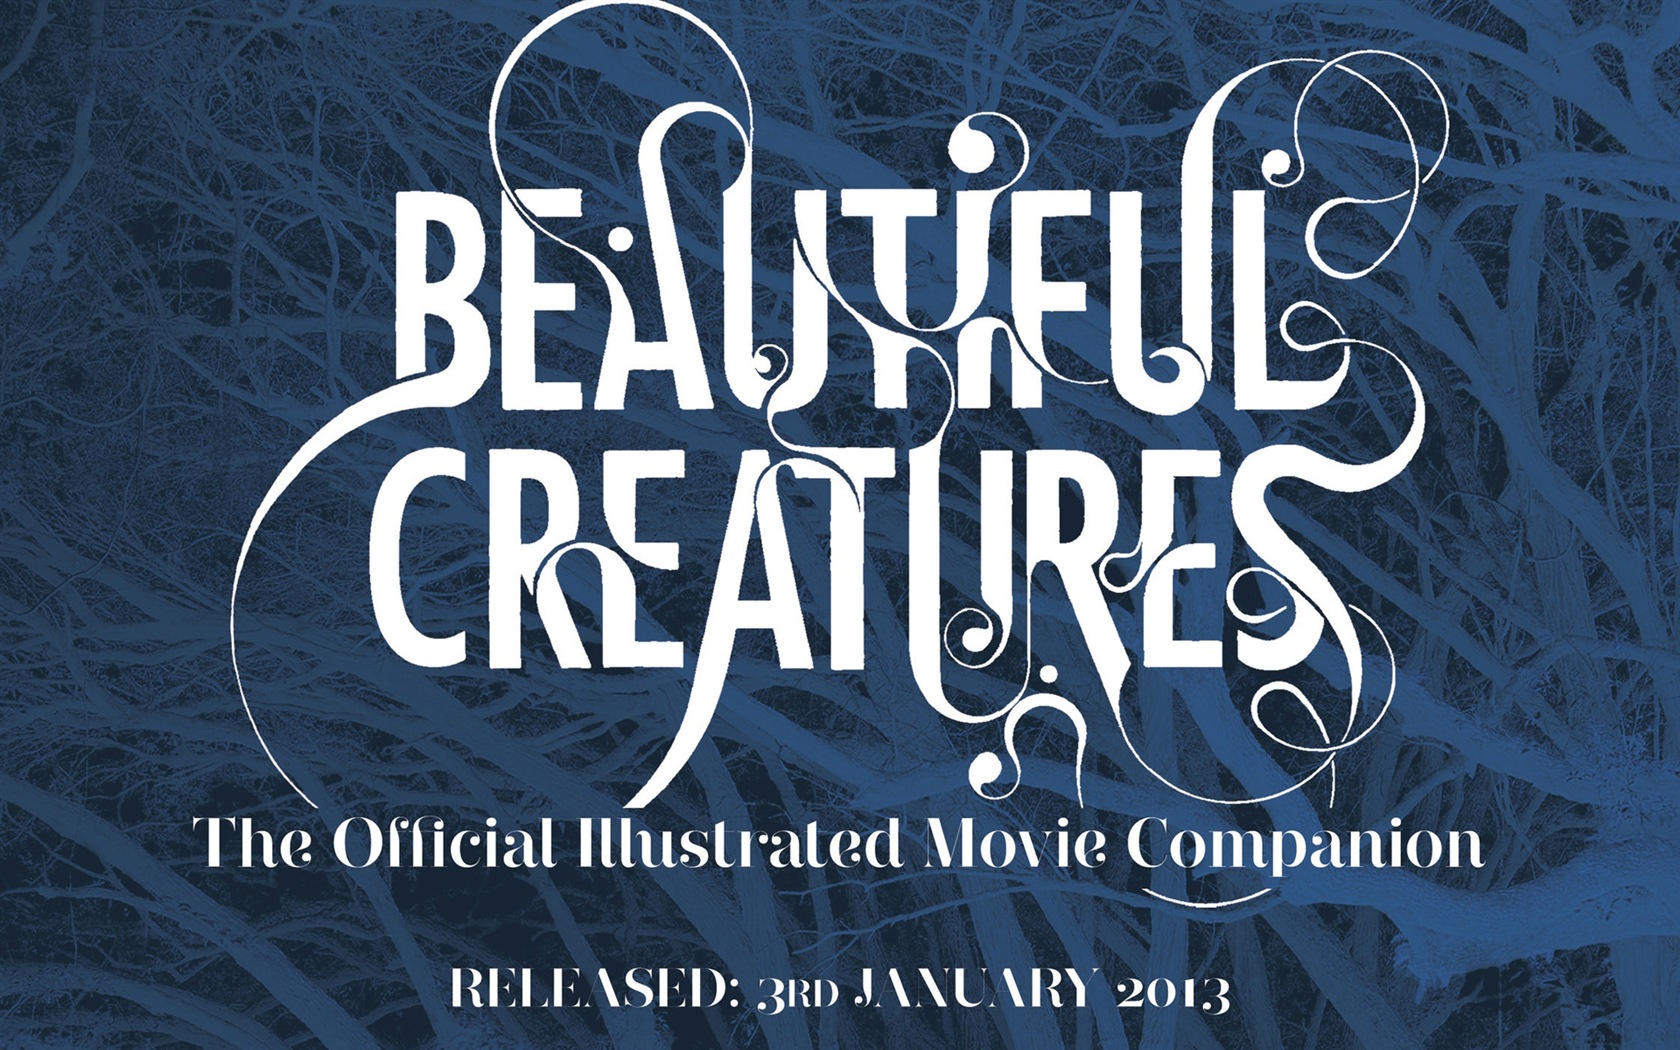 Beautiful Creatures 2013 HD movie wallpapers #4 - 1680x1050